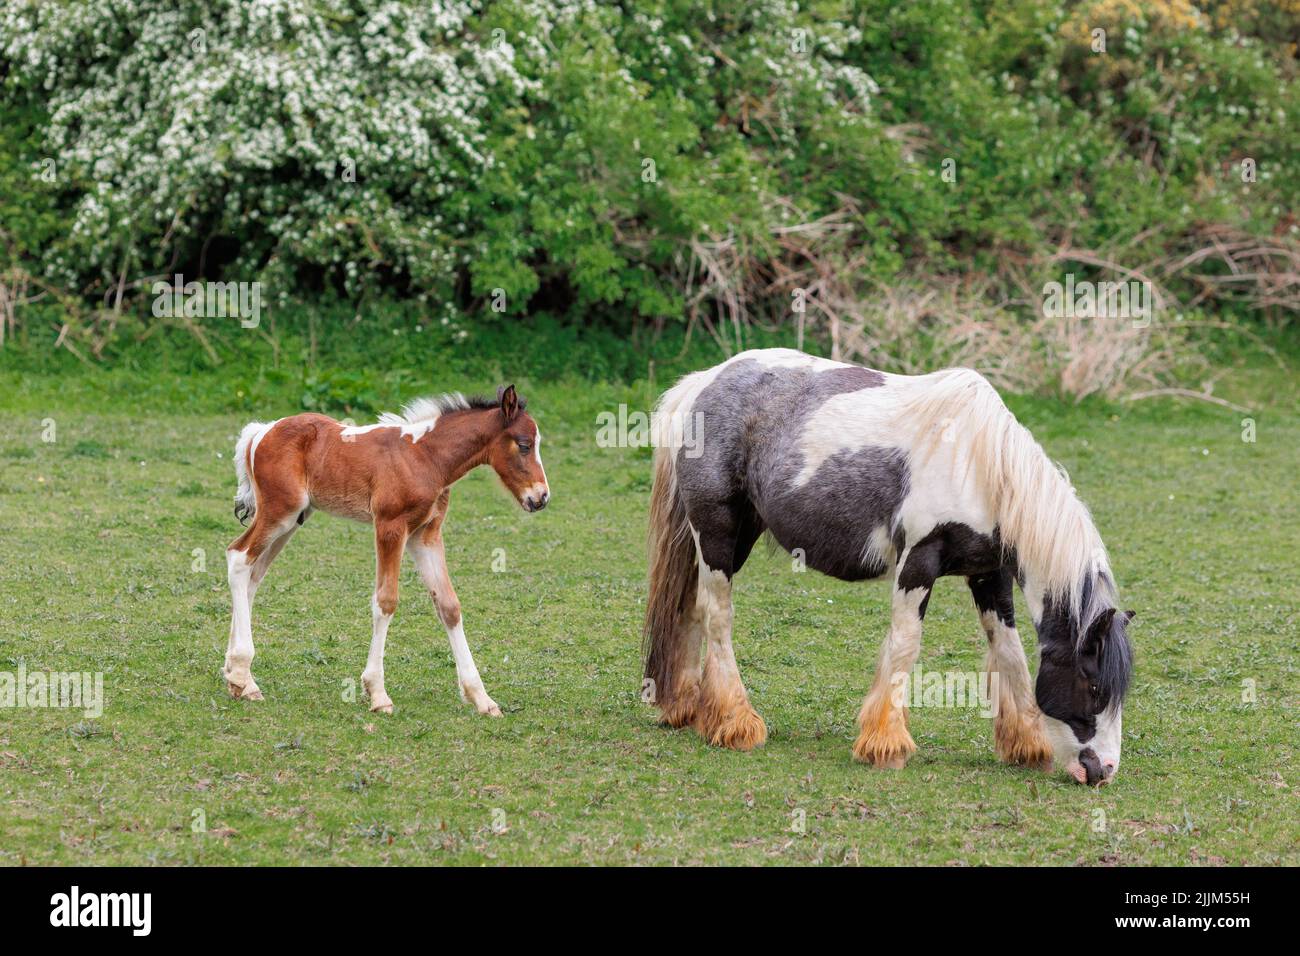 Two horses grazing, a mother with a young newborn foal Stock Photo